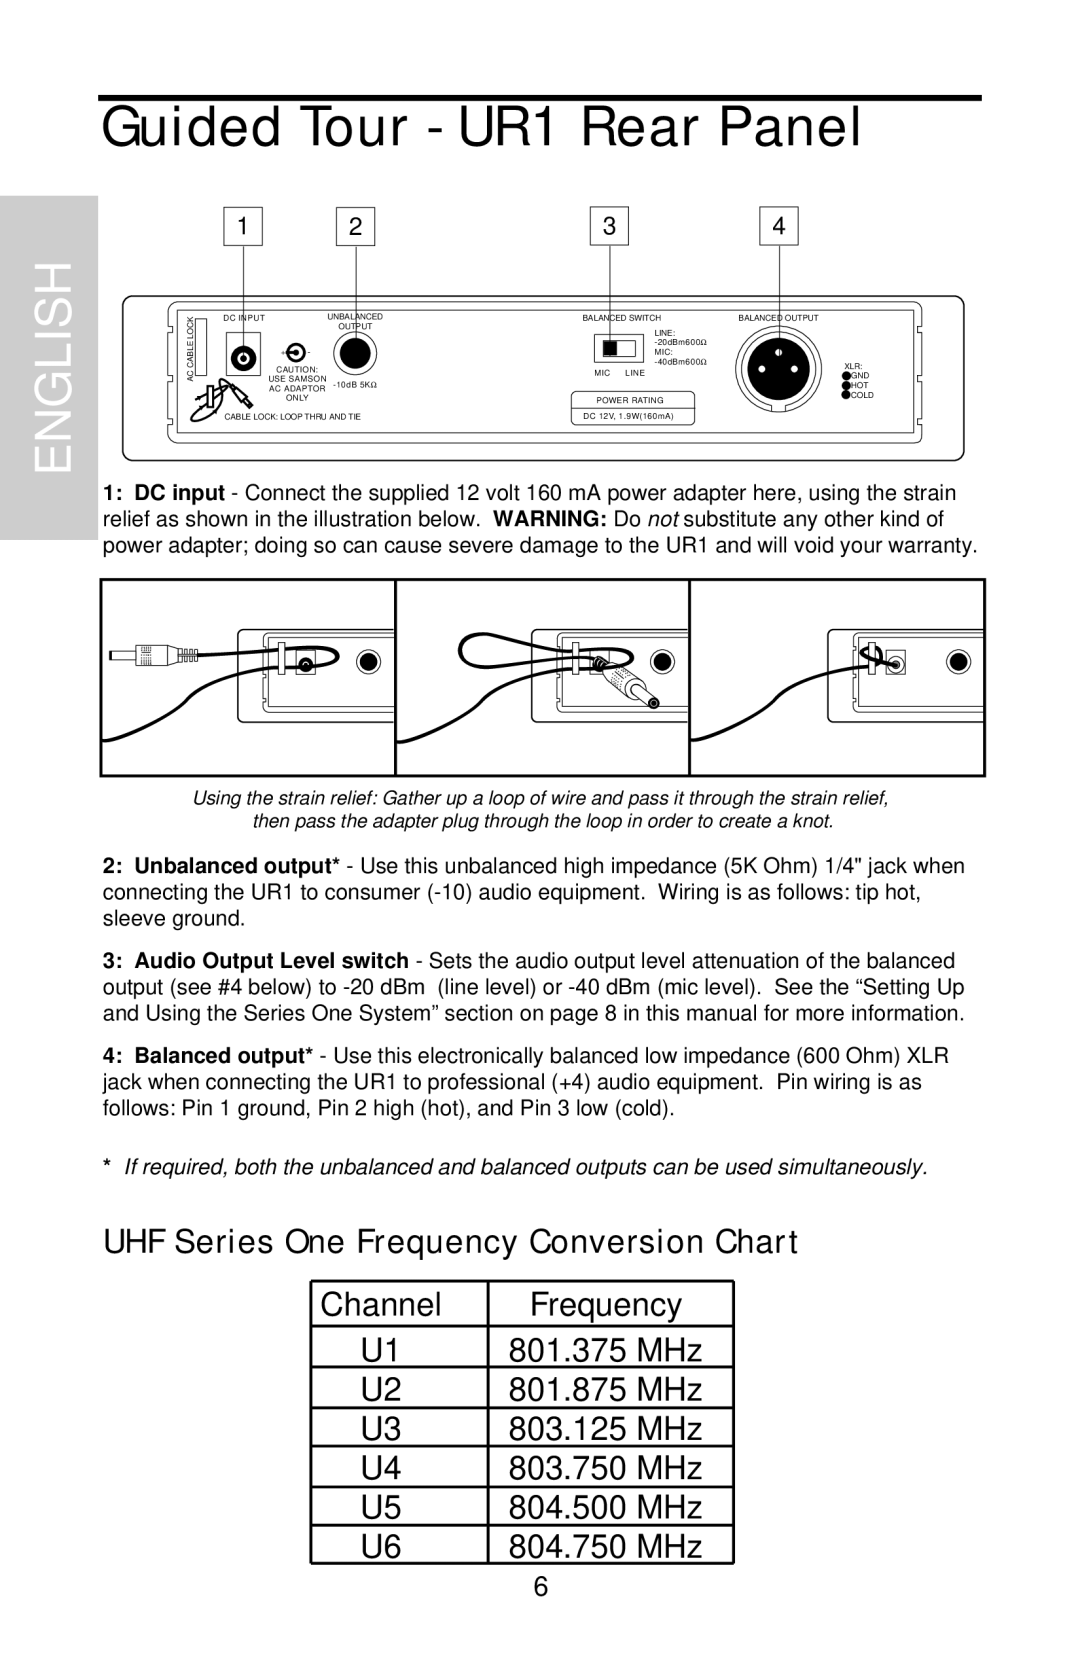 Samson UHF 801 owner manual Guided Tour - UR1 Rear Panel, UHF Series One Frequency Conversion Chart, English 